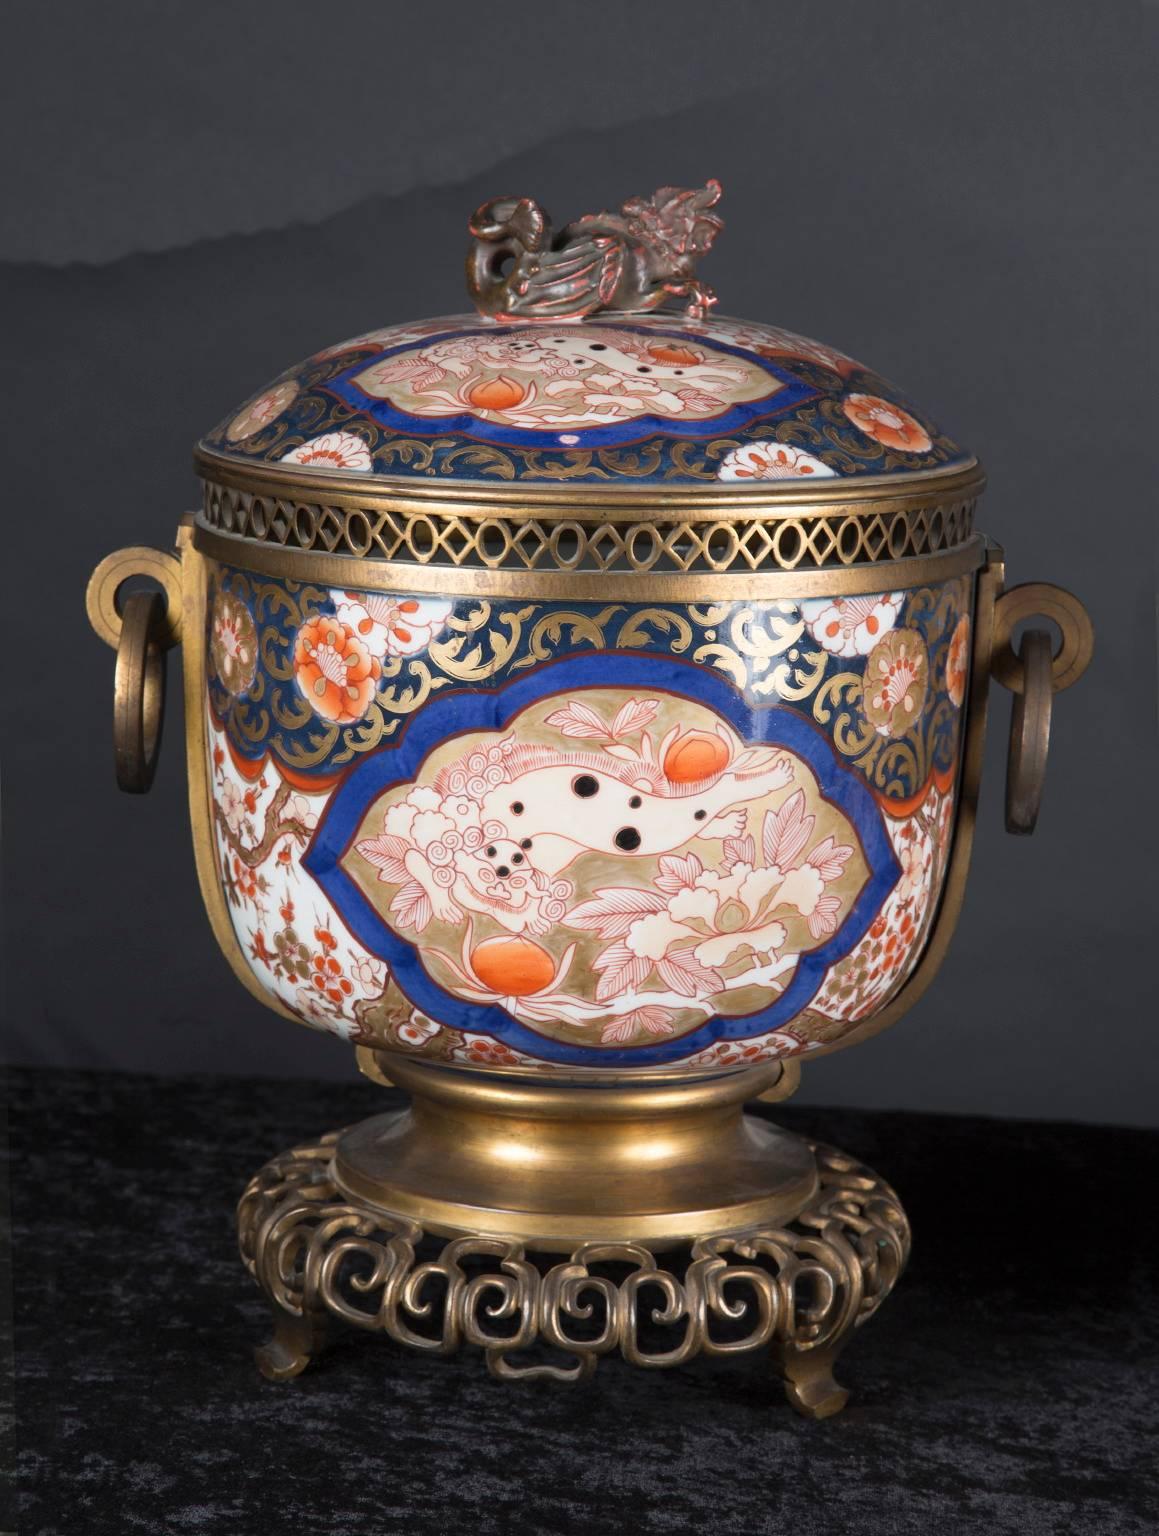 This gorgeous pair of 19th century Japanese Imari vases are beautifully hand-painted in the classic Imari colors of blue, terra cotta, gold and white. The pair features a Foo dog handle on each top, and detailed bronze work throughout. Note the